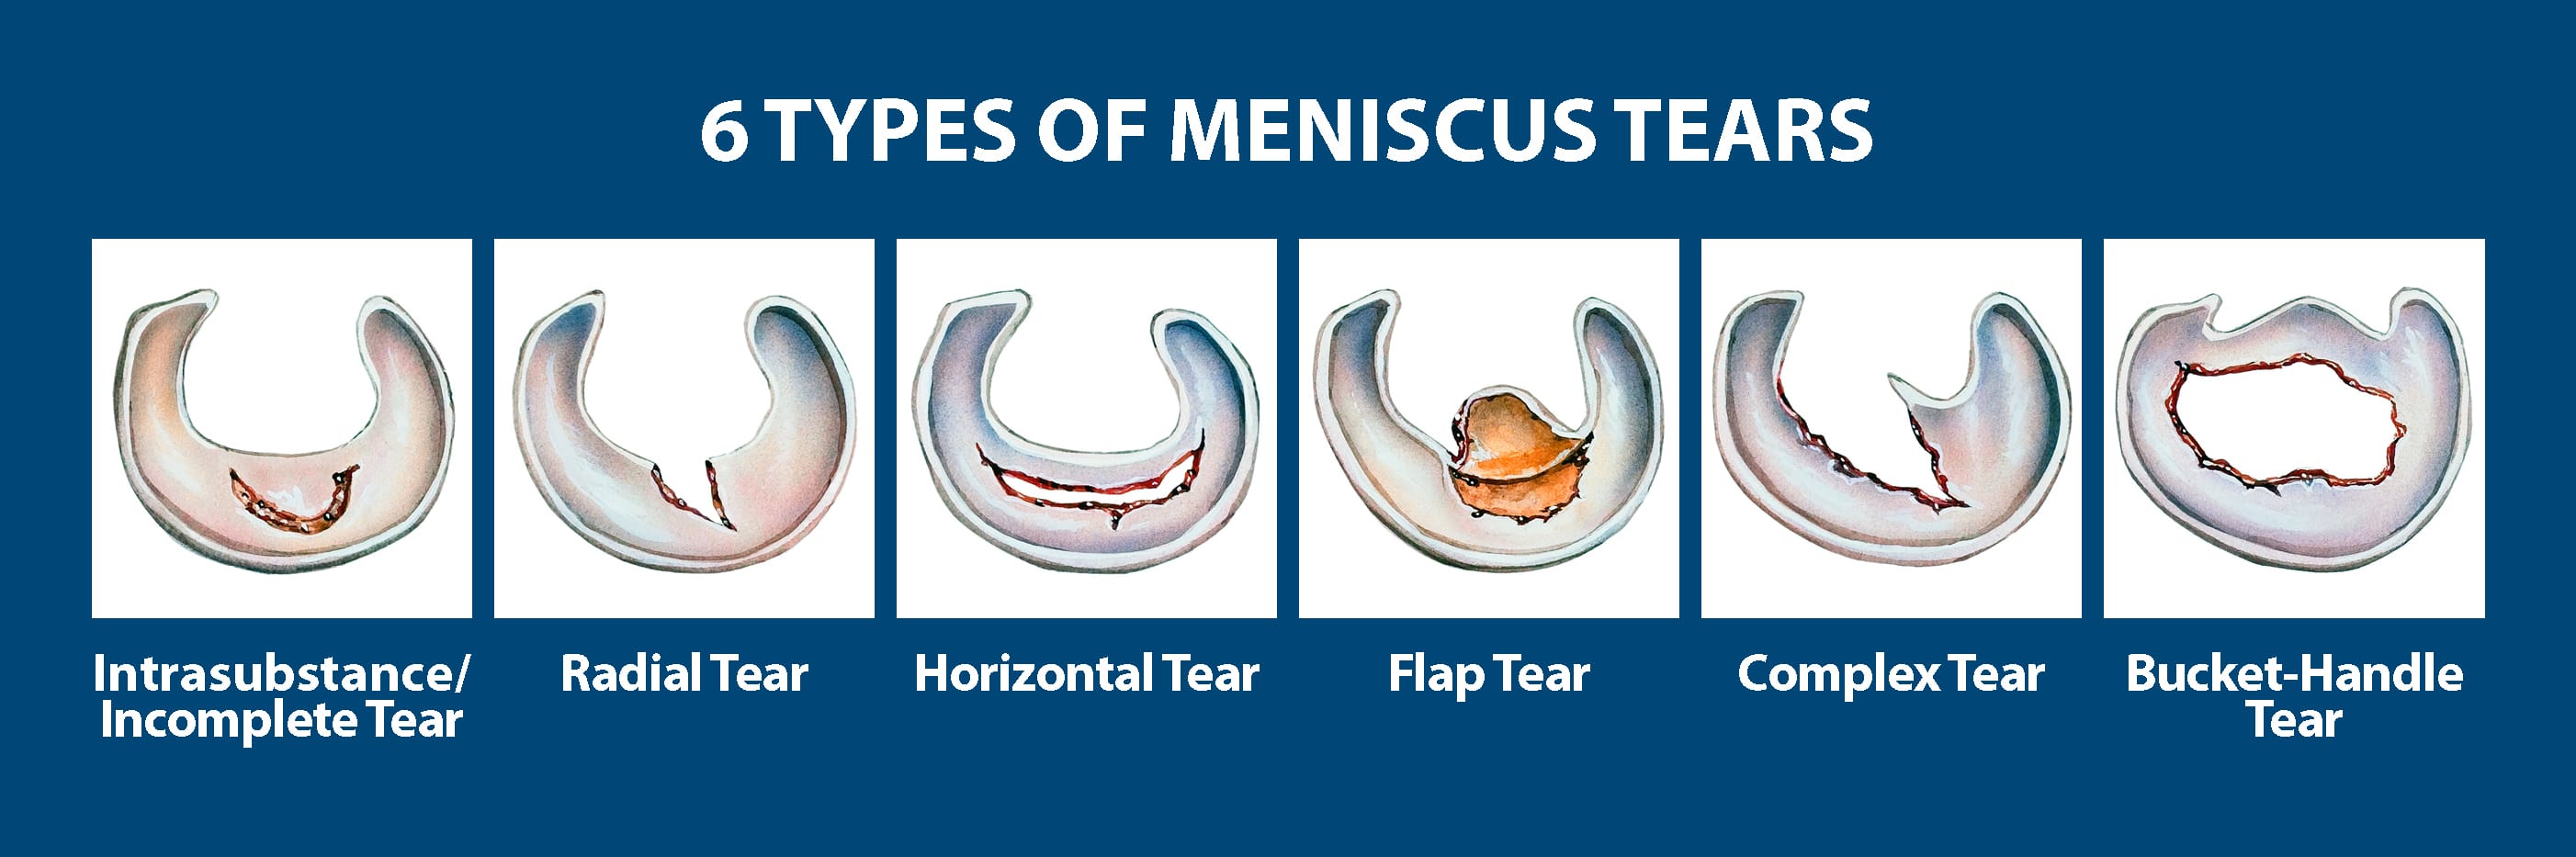 Different Types Of Meniscus Tears